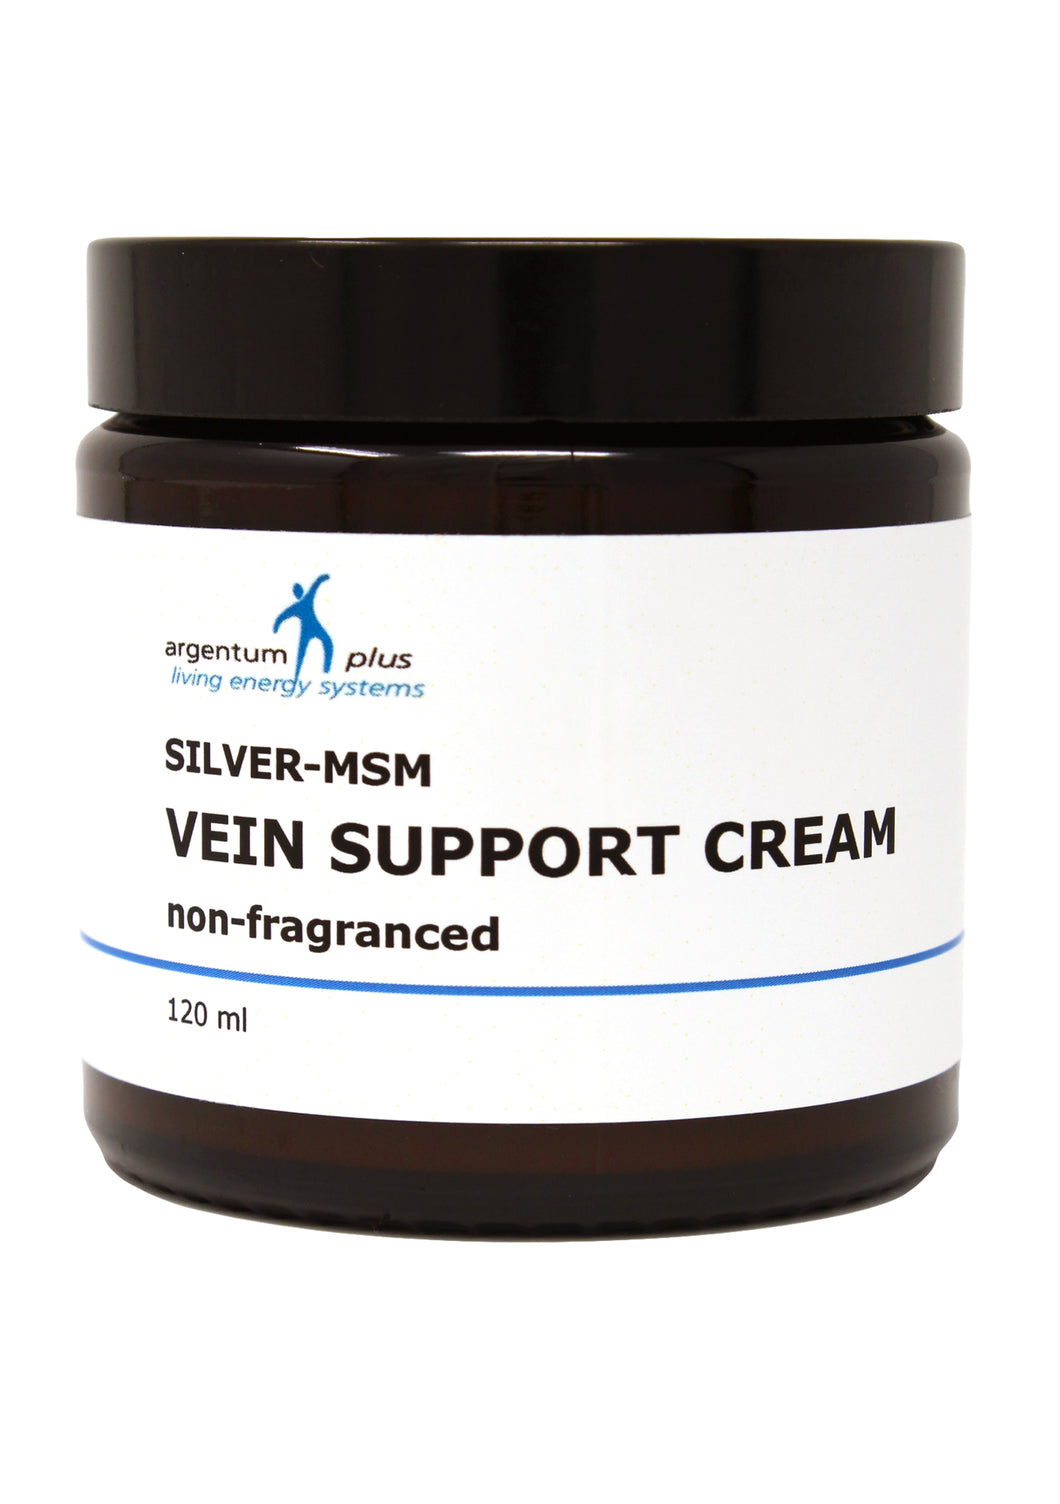 Silver-MSM Vein Support Cream non-fragranced (2 size options)